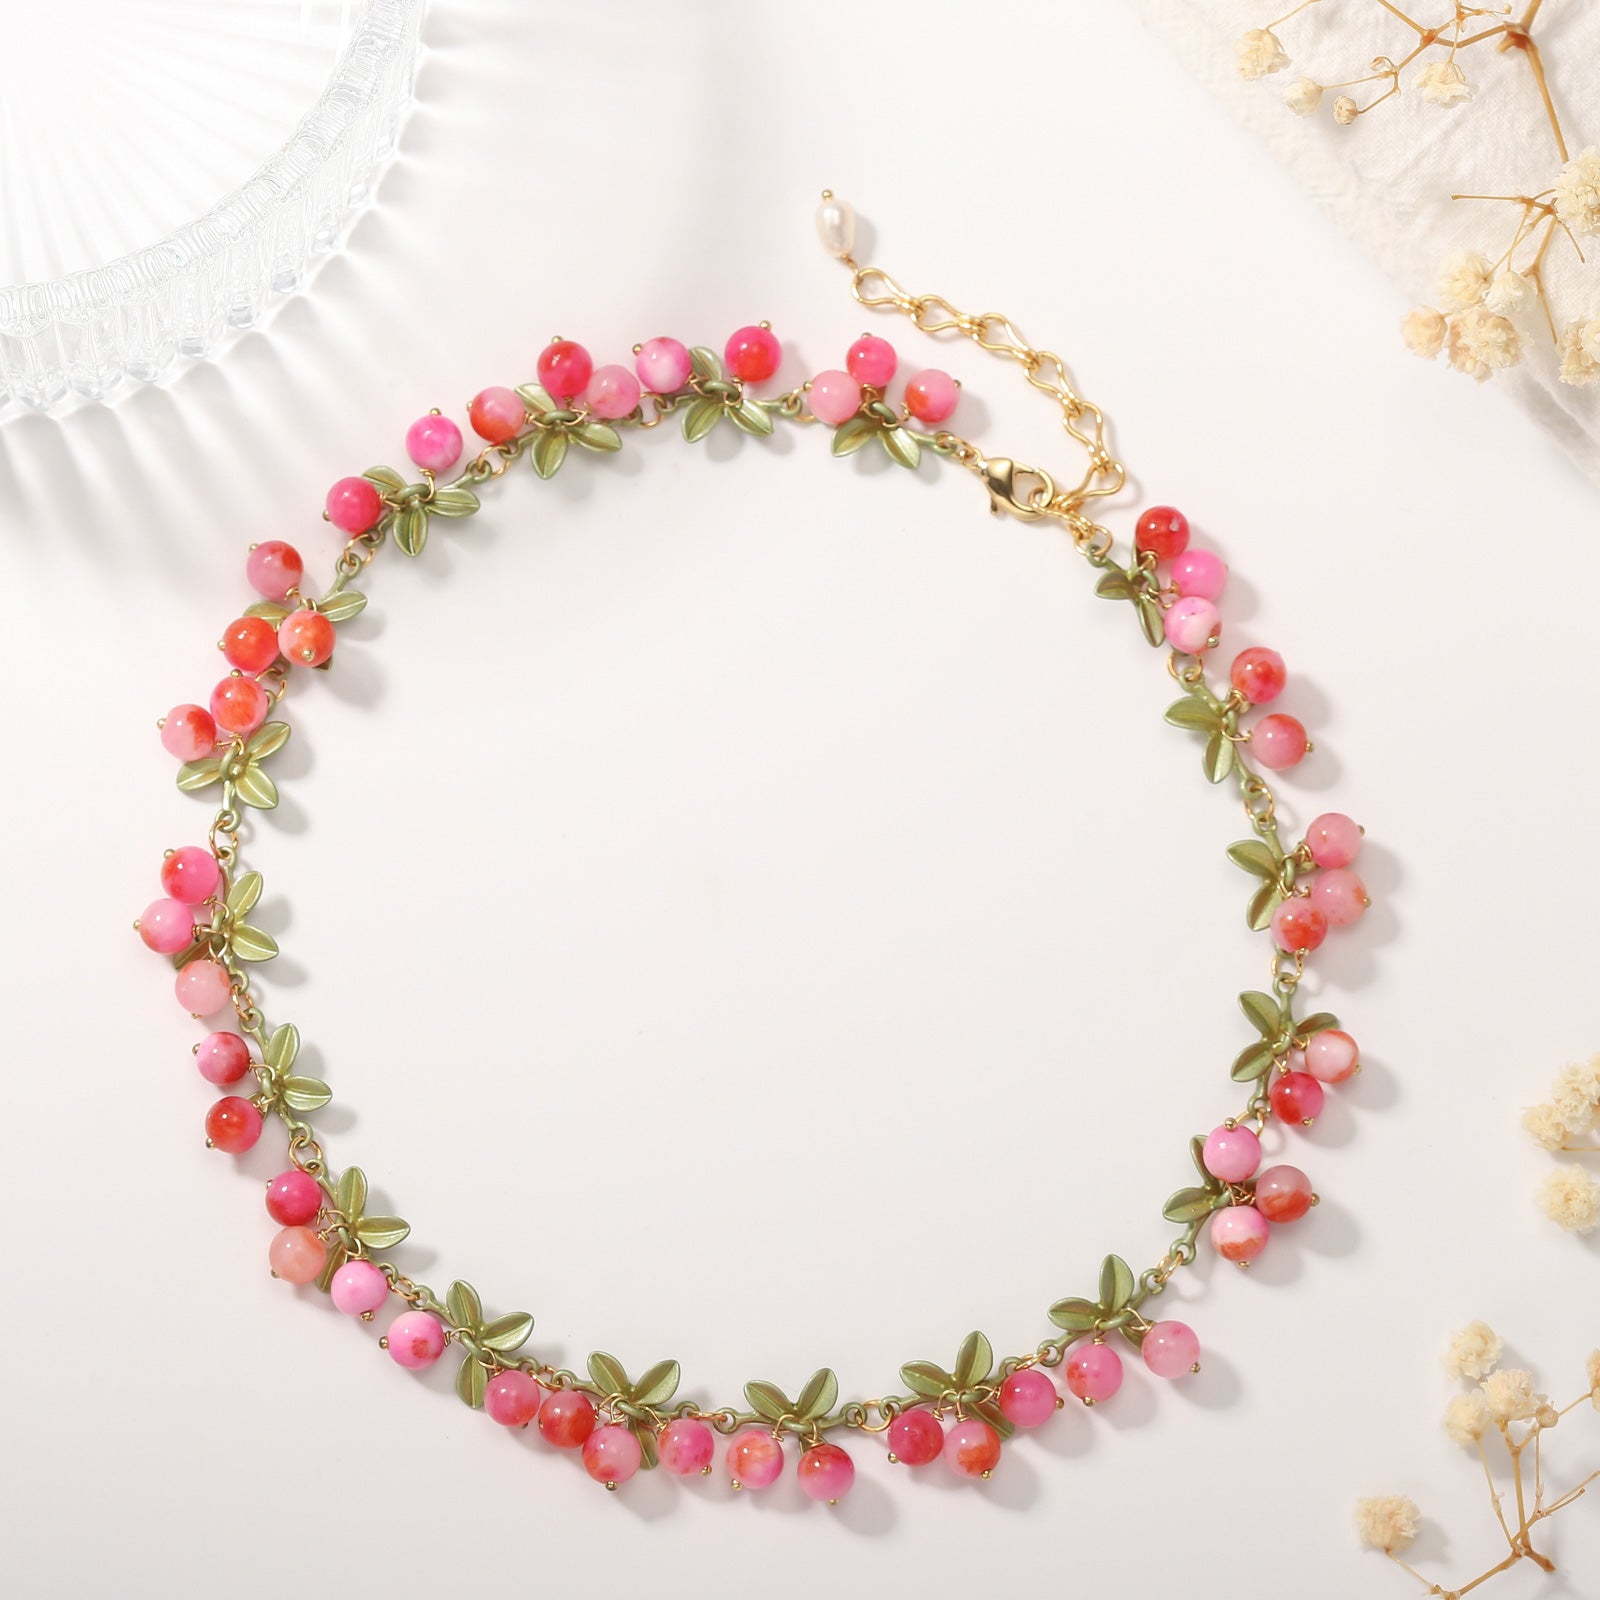 Pinkberry Necklace Orchard Jewelry